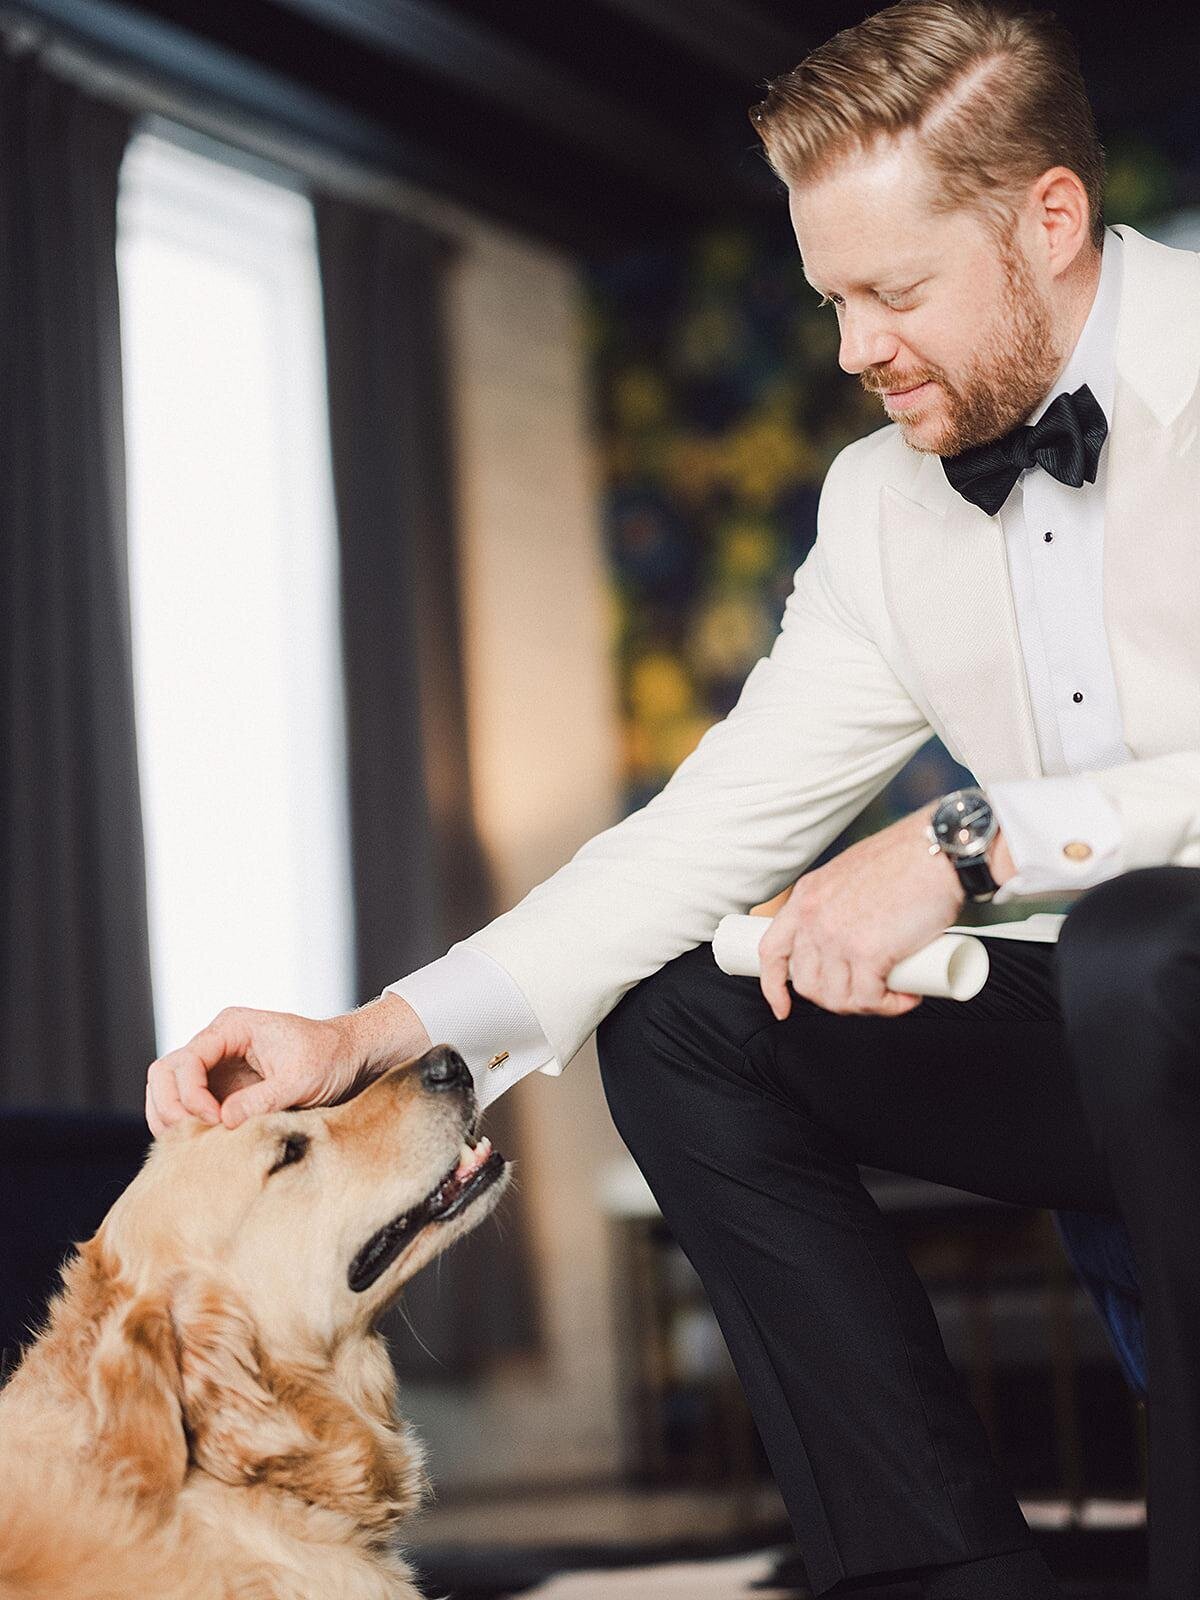 The groom, wearing a tuxedo with a white jacket pet his golden retriever  Frank, who is also the best man at his wedding